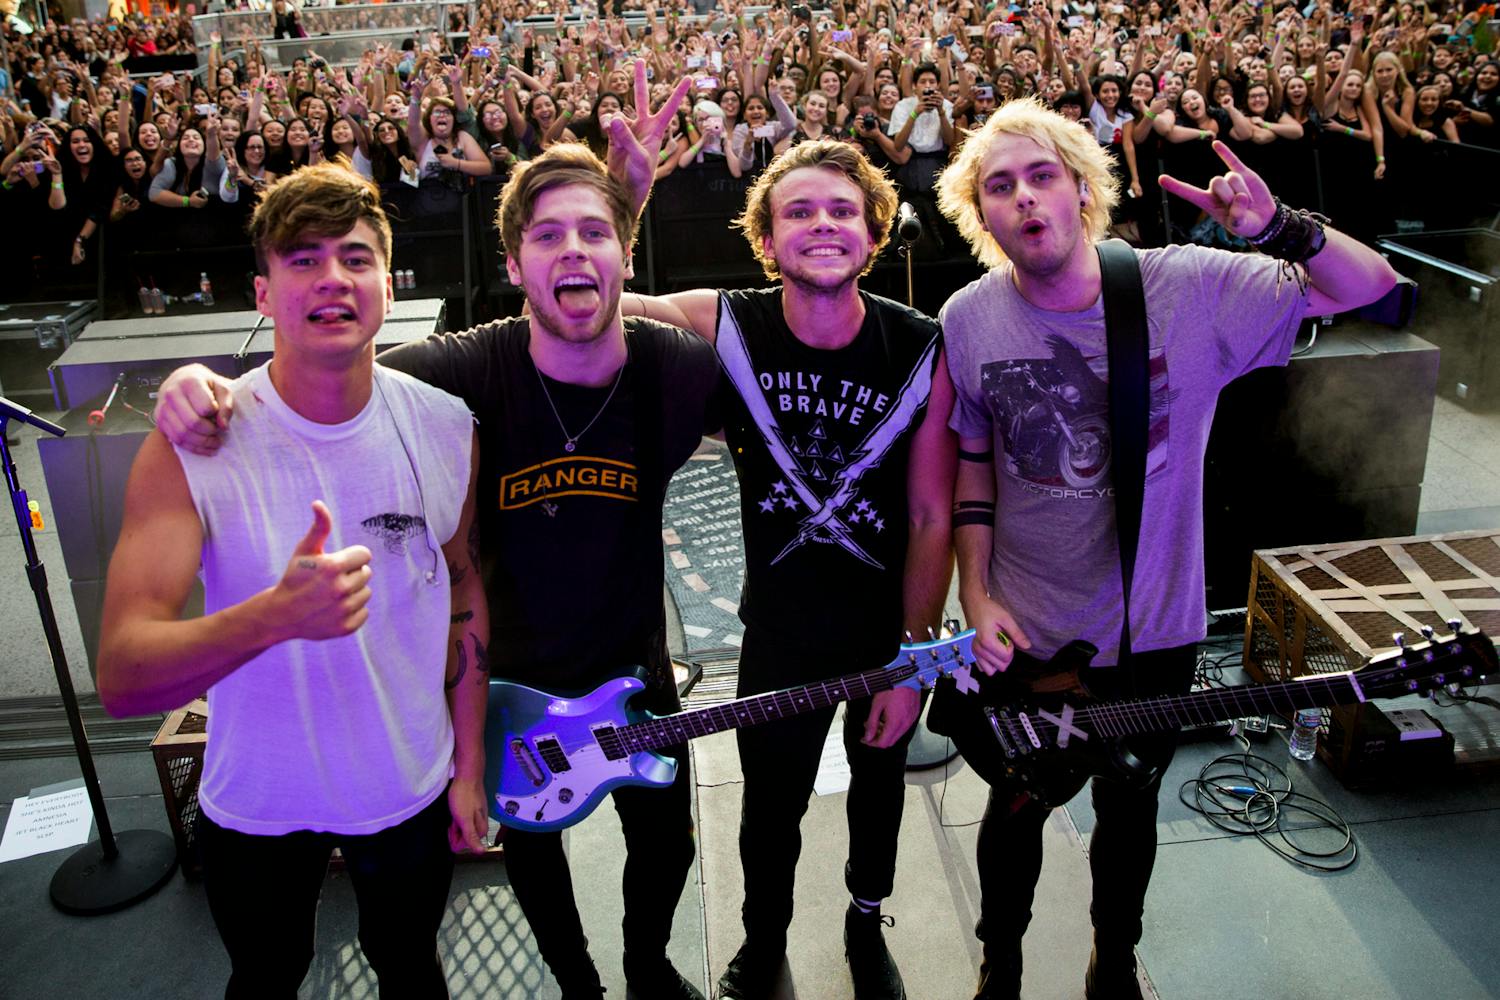 Australian pop band 5 Seconds of Summer members, from left, Calum Hood, Luke Hemmings, Ashton Irwin and Michael Clifford, following their performance at Hollywood & Highland Center on Oct. 23, 2015, in Hollywood, California. The group released their fifth album, 5SOS5, on Sept. 23, 2022. (Jay L. Clendenin/Los Angeles Times/TNS)